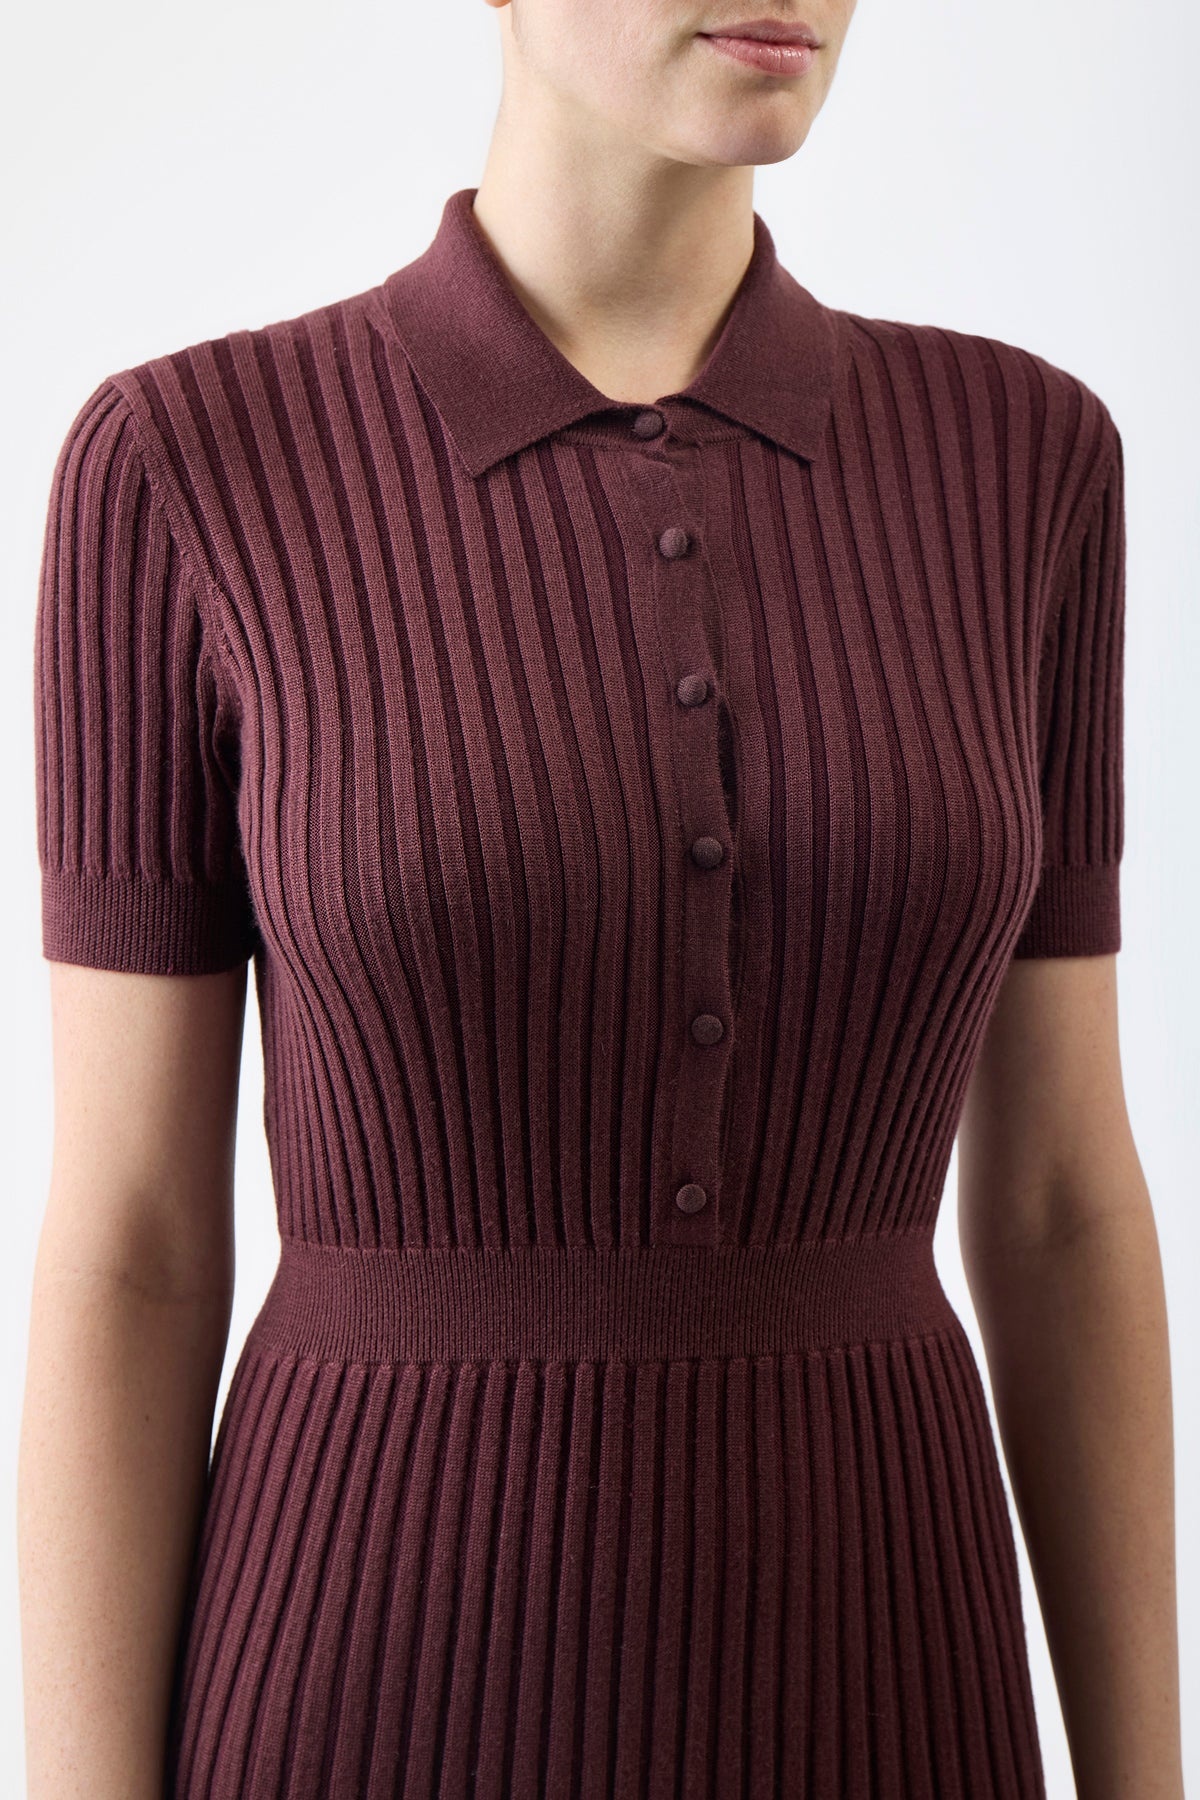 Amor Ribbed Dress in Deep Bordeaux Silk Cashmere - 5